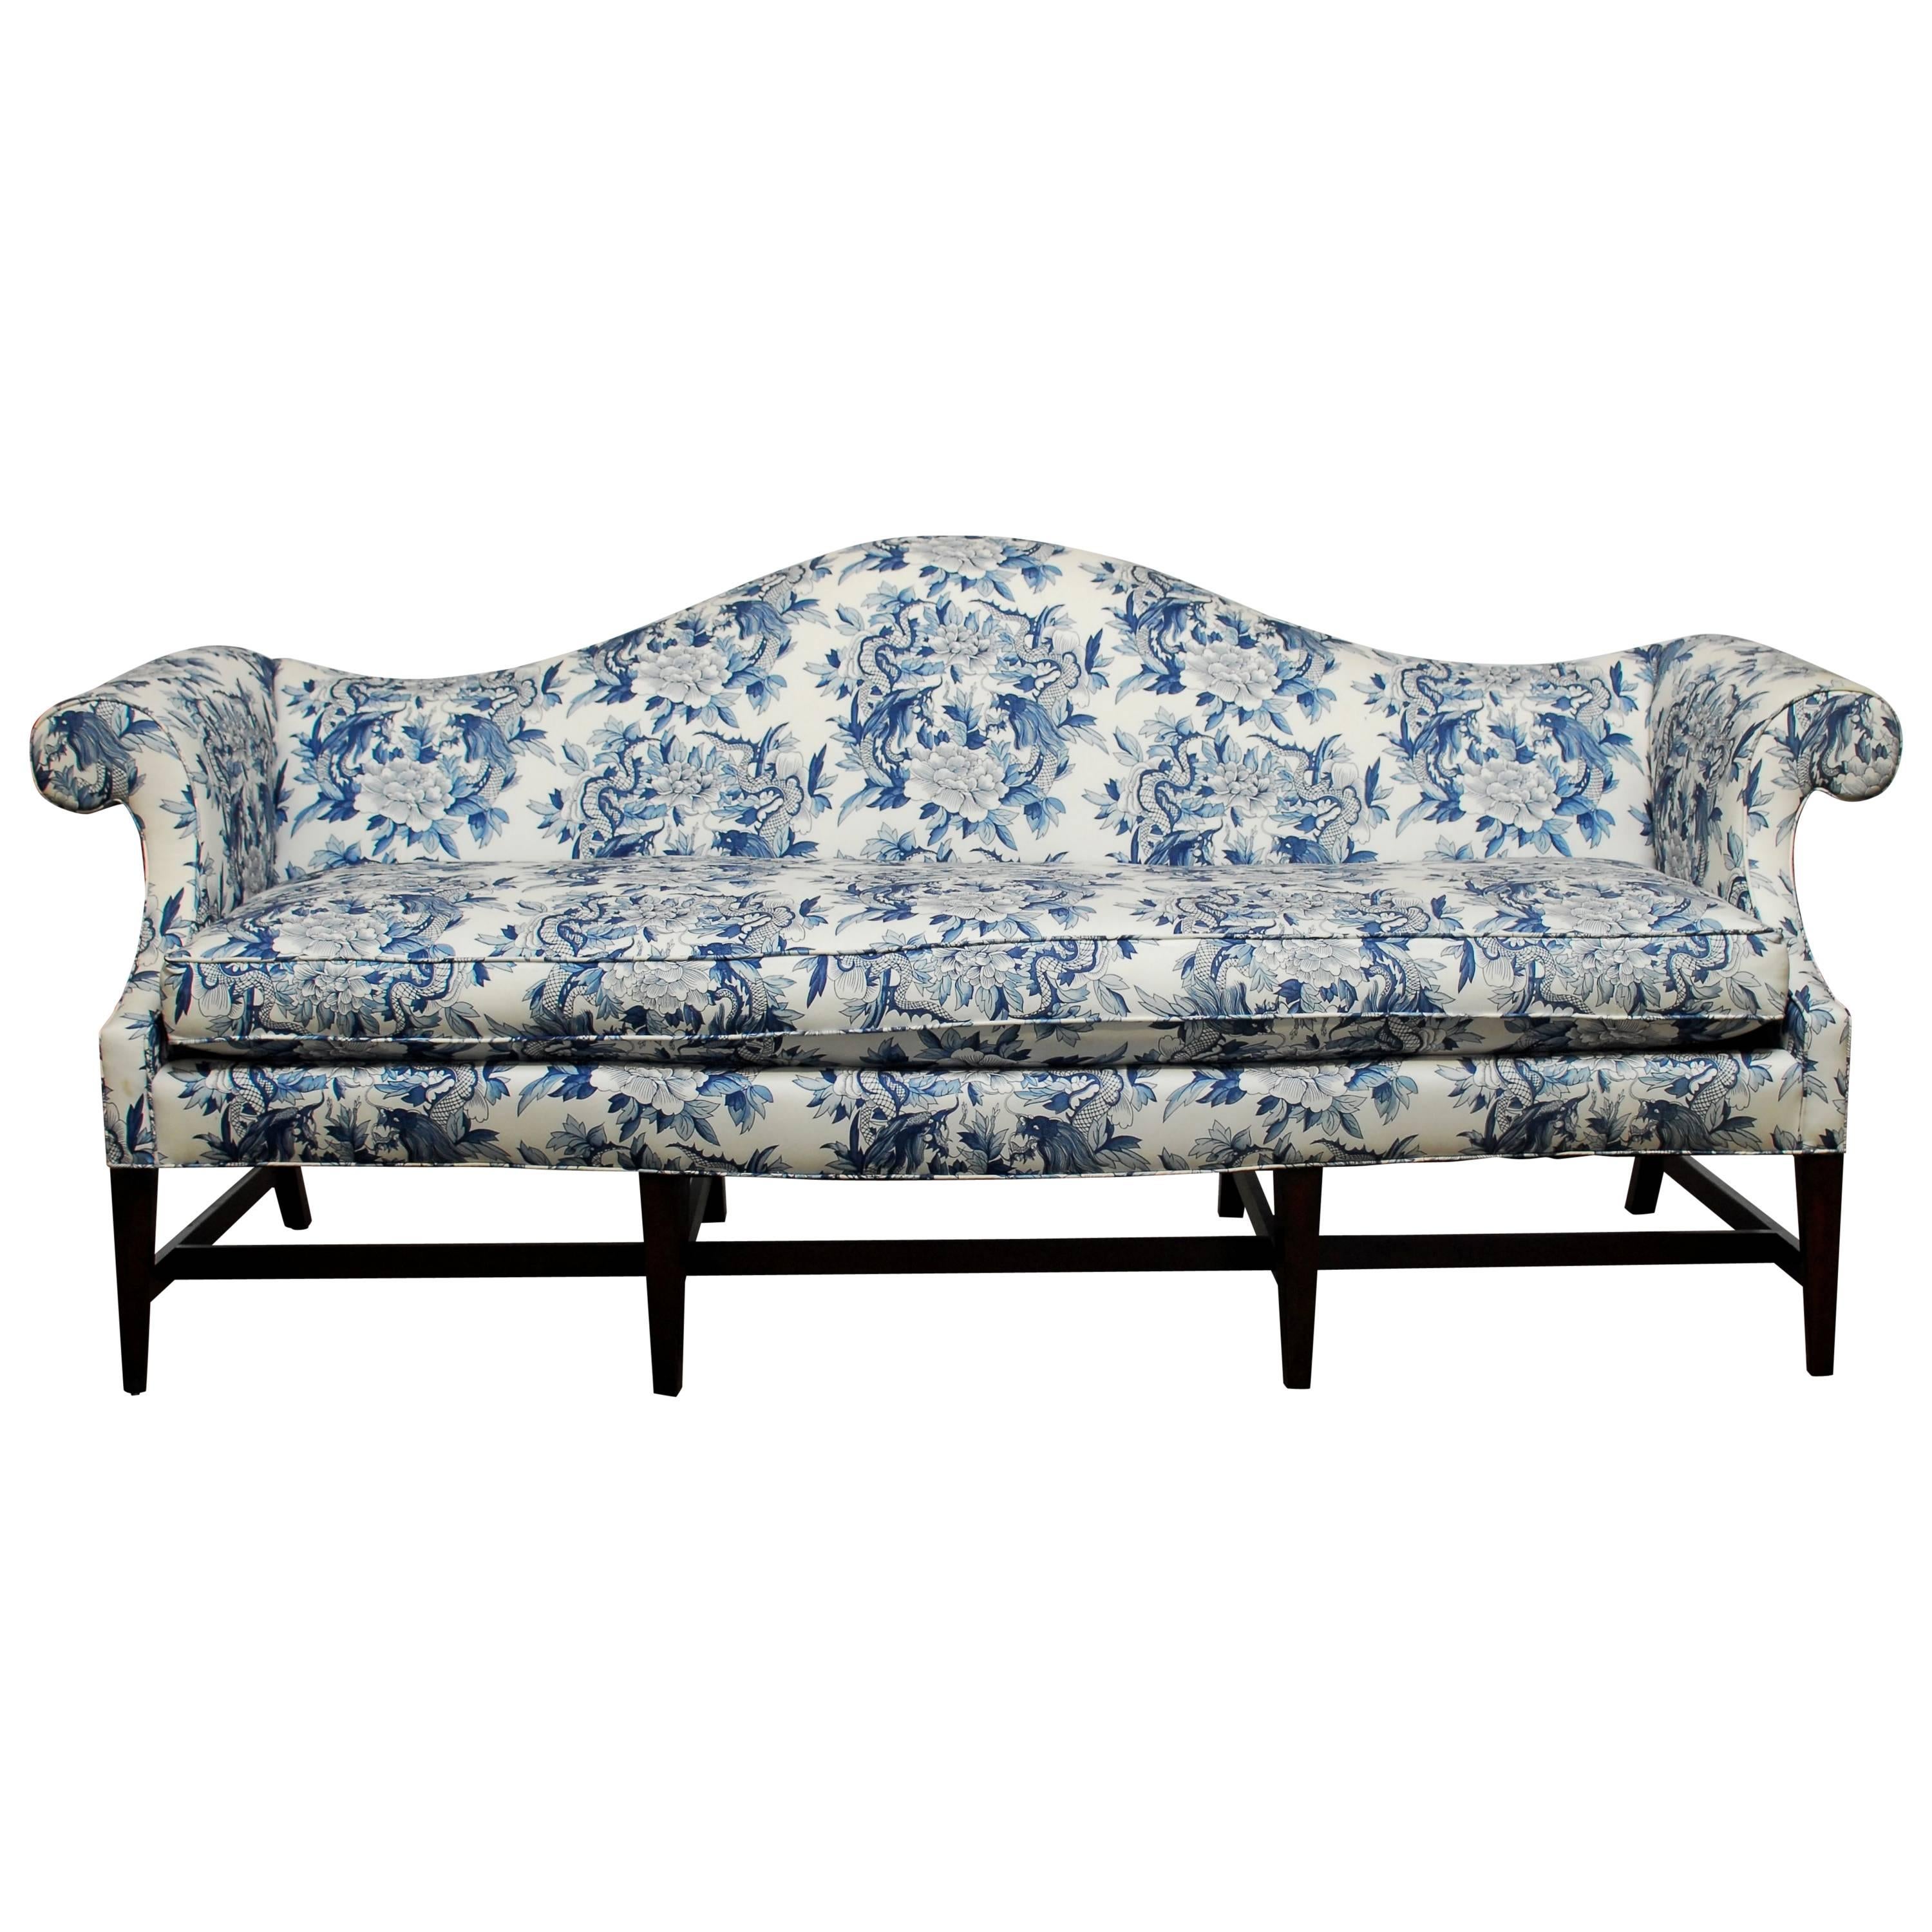 Chippendale Style Camelback Sofa with Chinoiserie Dragon Upholstery